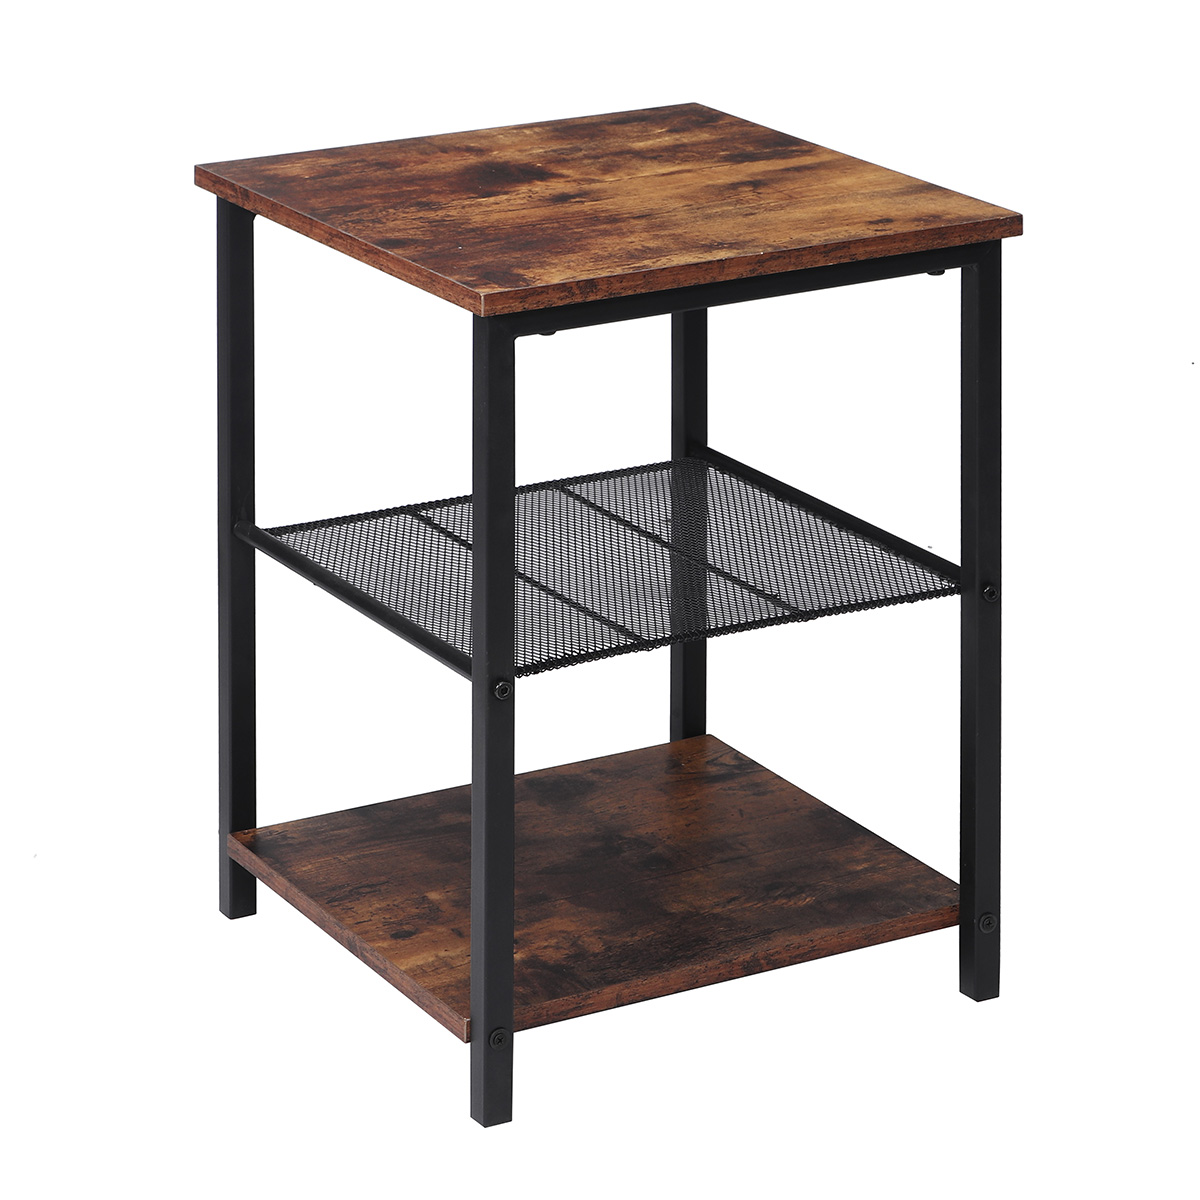 Nightstands-2-3-Tier-Side-Table-with-Adjustable-Shelf-Industrial-End-Table-for-Small-Space-in-Living-1918210-3